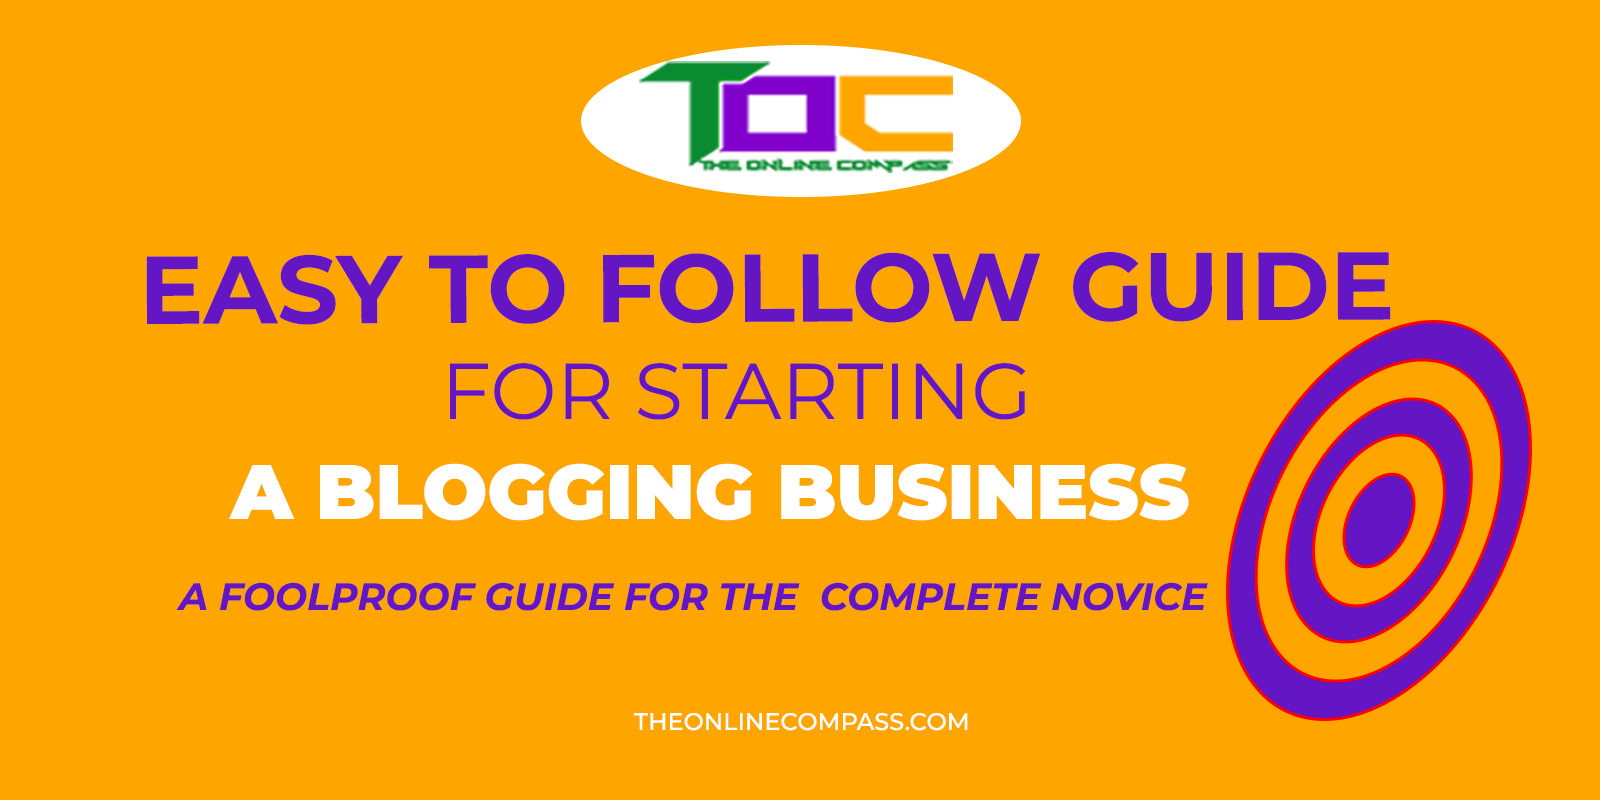 HOW TO START A BLOGGING BUSINESS